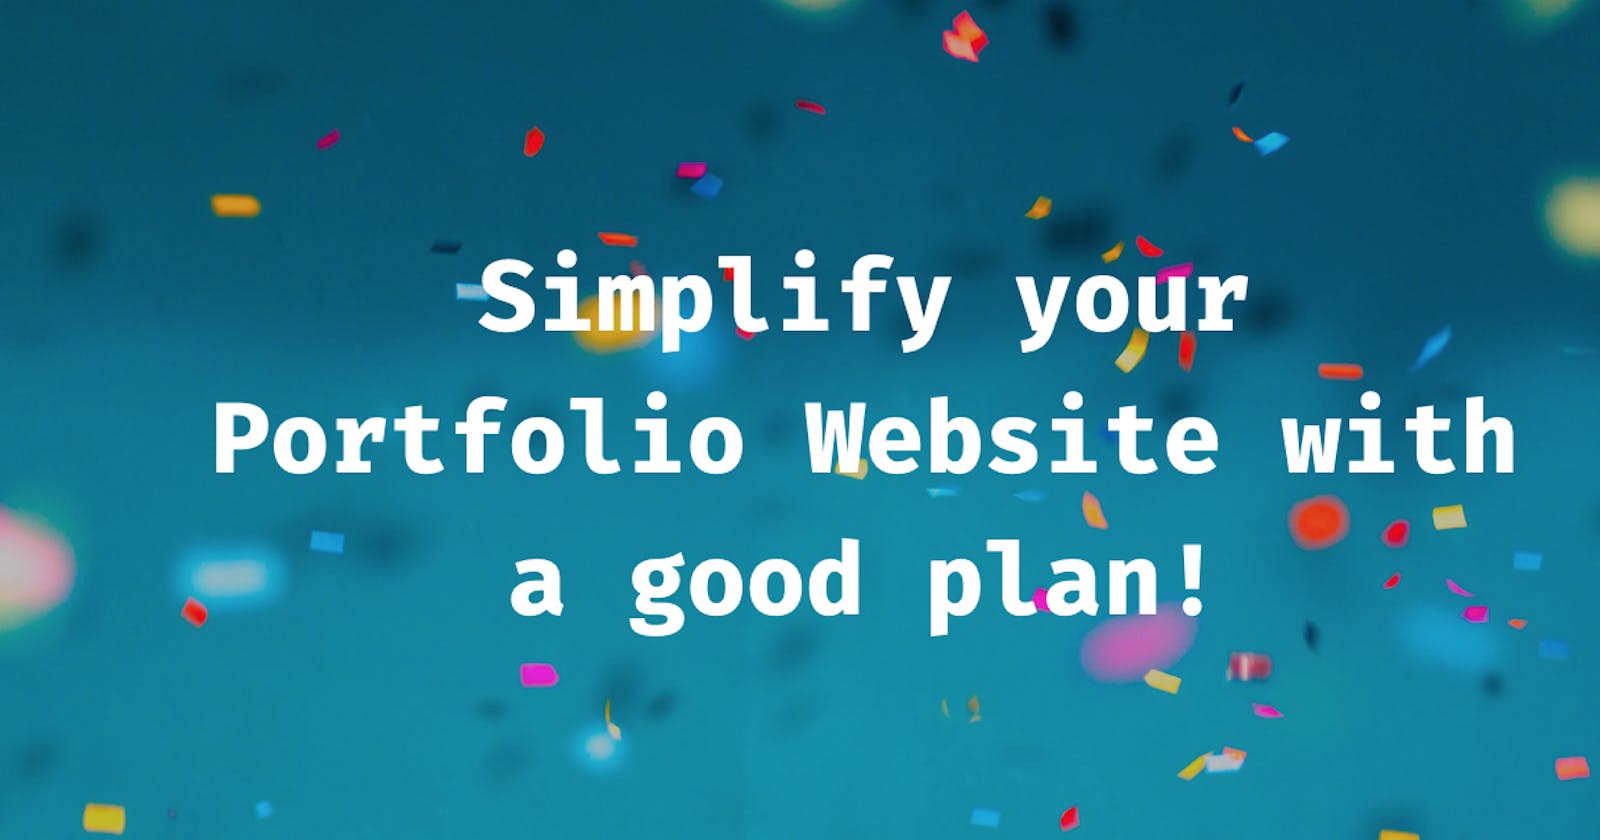 Simplify the development  of Portfolio Website by planning your Stack and Design